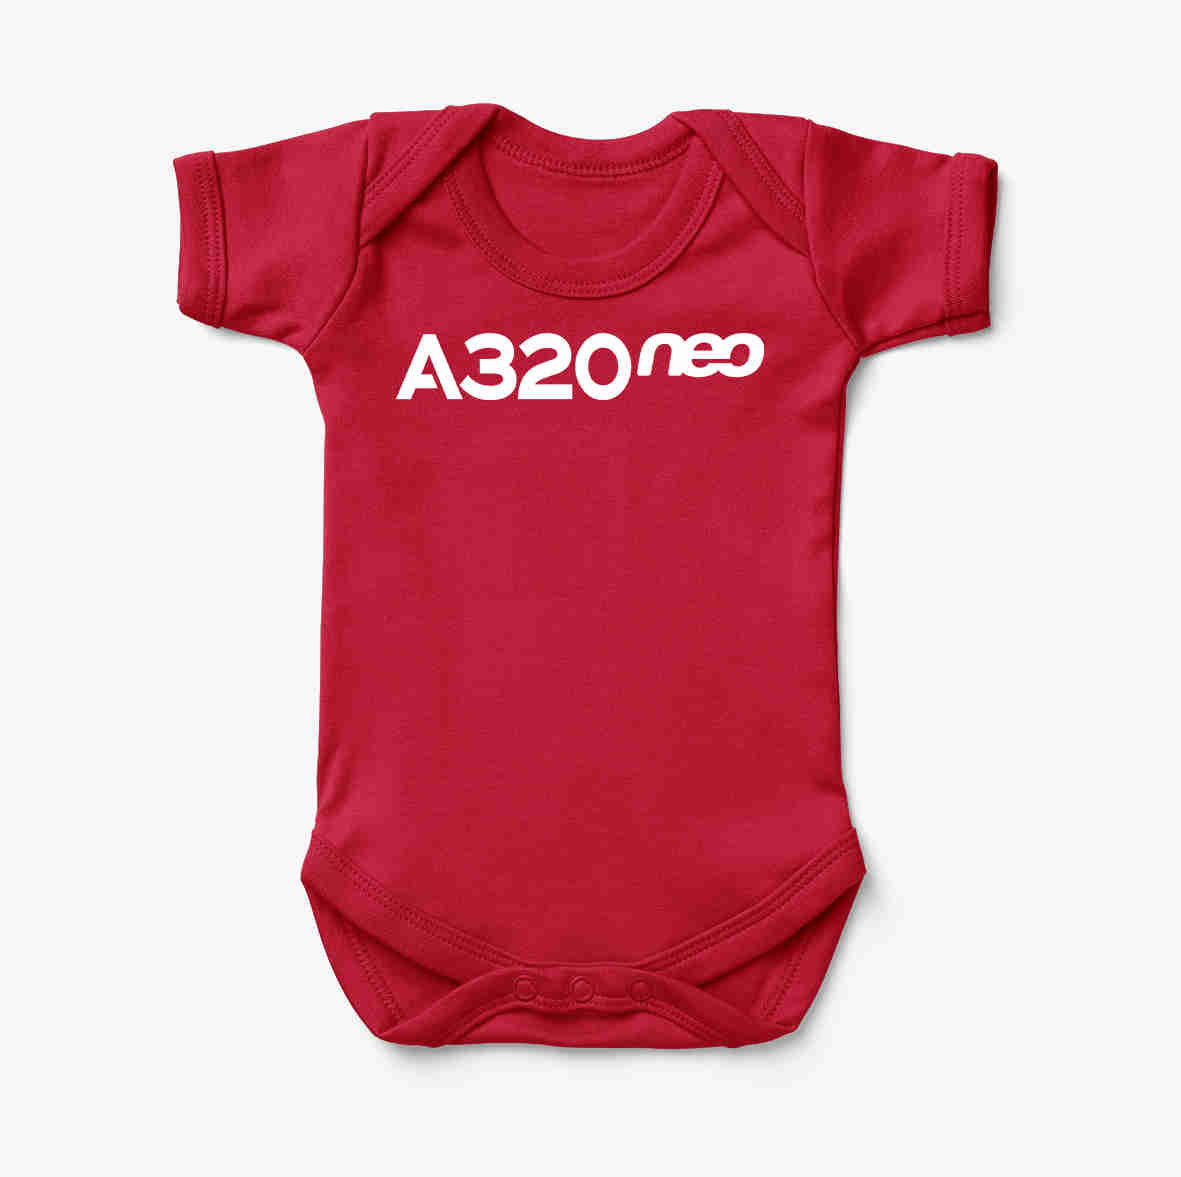 A320neo & Text Designed Baby Bodysuits